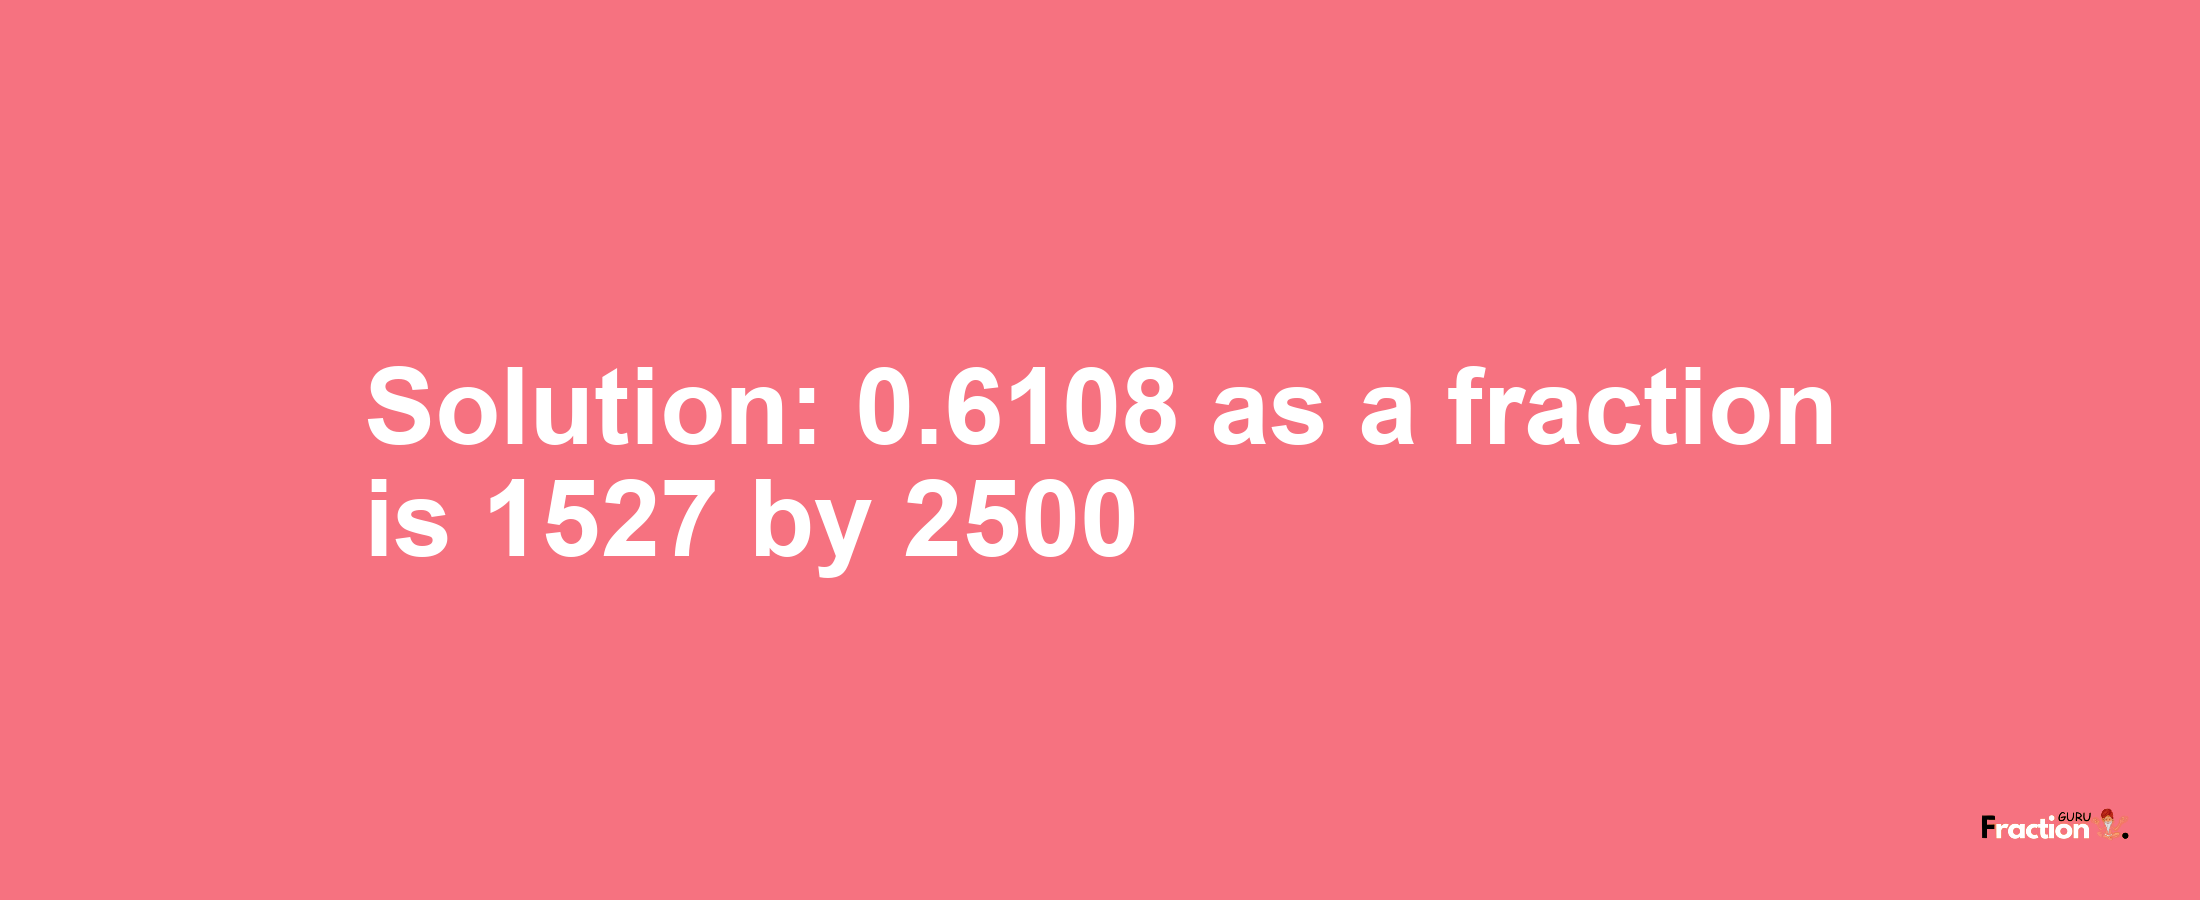 Solution:0.6108 as a fraction is 1527/2500